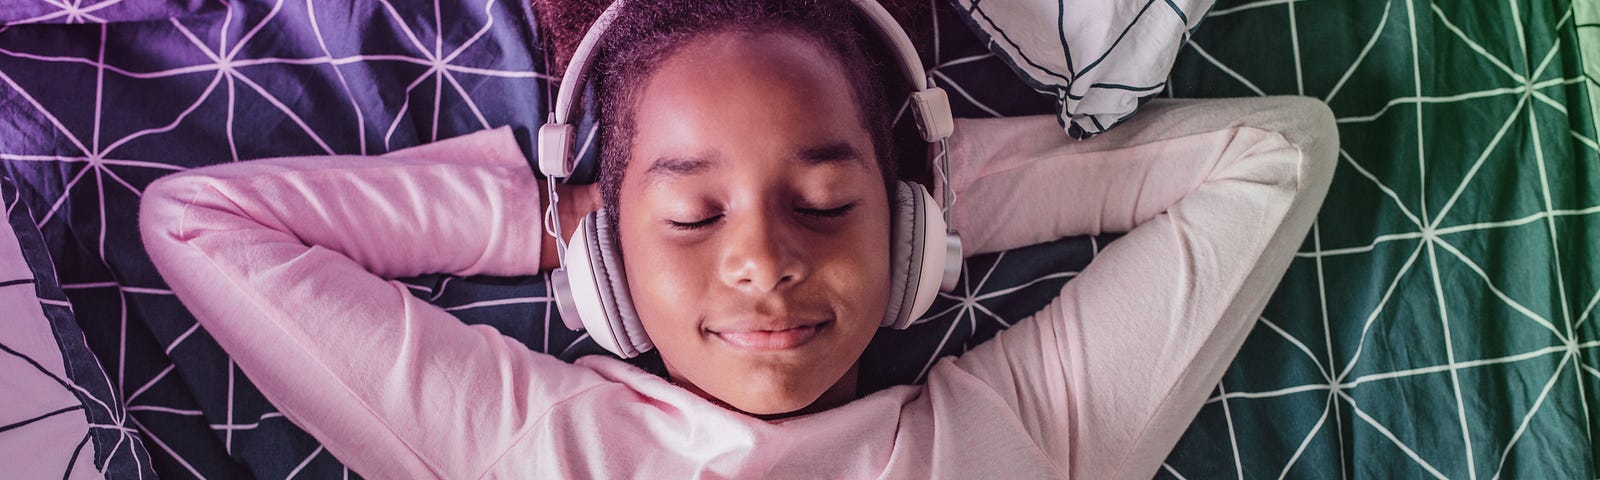 Photo of a middle school girl lying down with her hands behind her head, eyes closed, with headphones on.